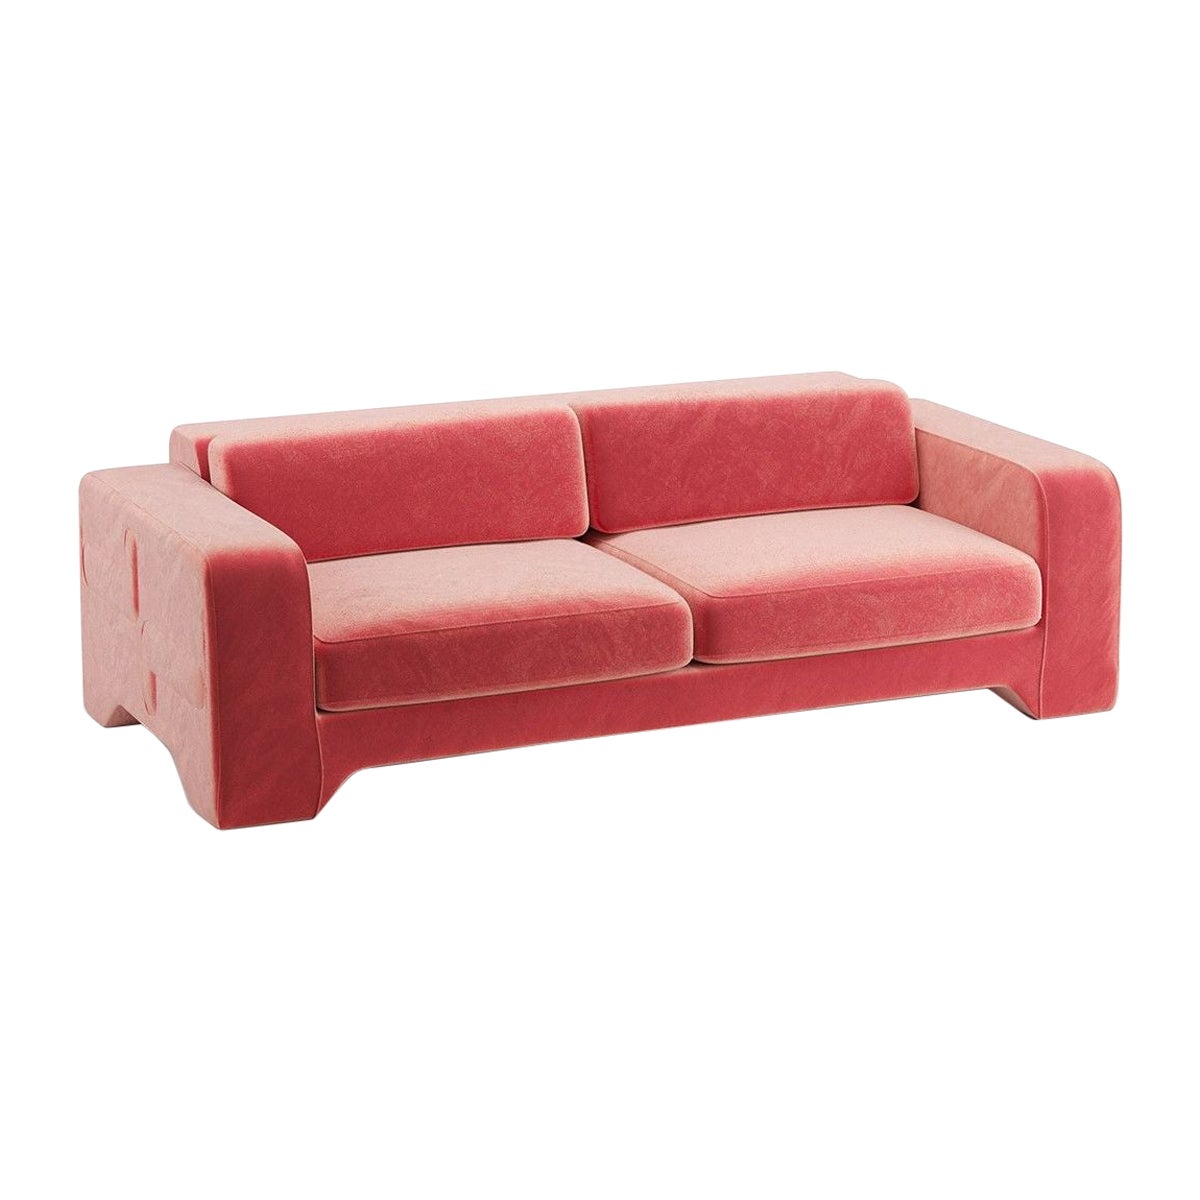 Popus Editions Giovanna 4 Seater Sofa in Pink Como Velvet Upholstery For Sale